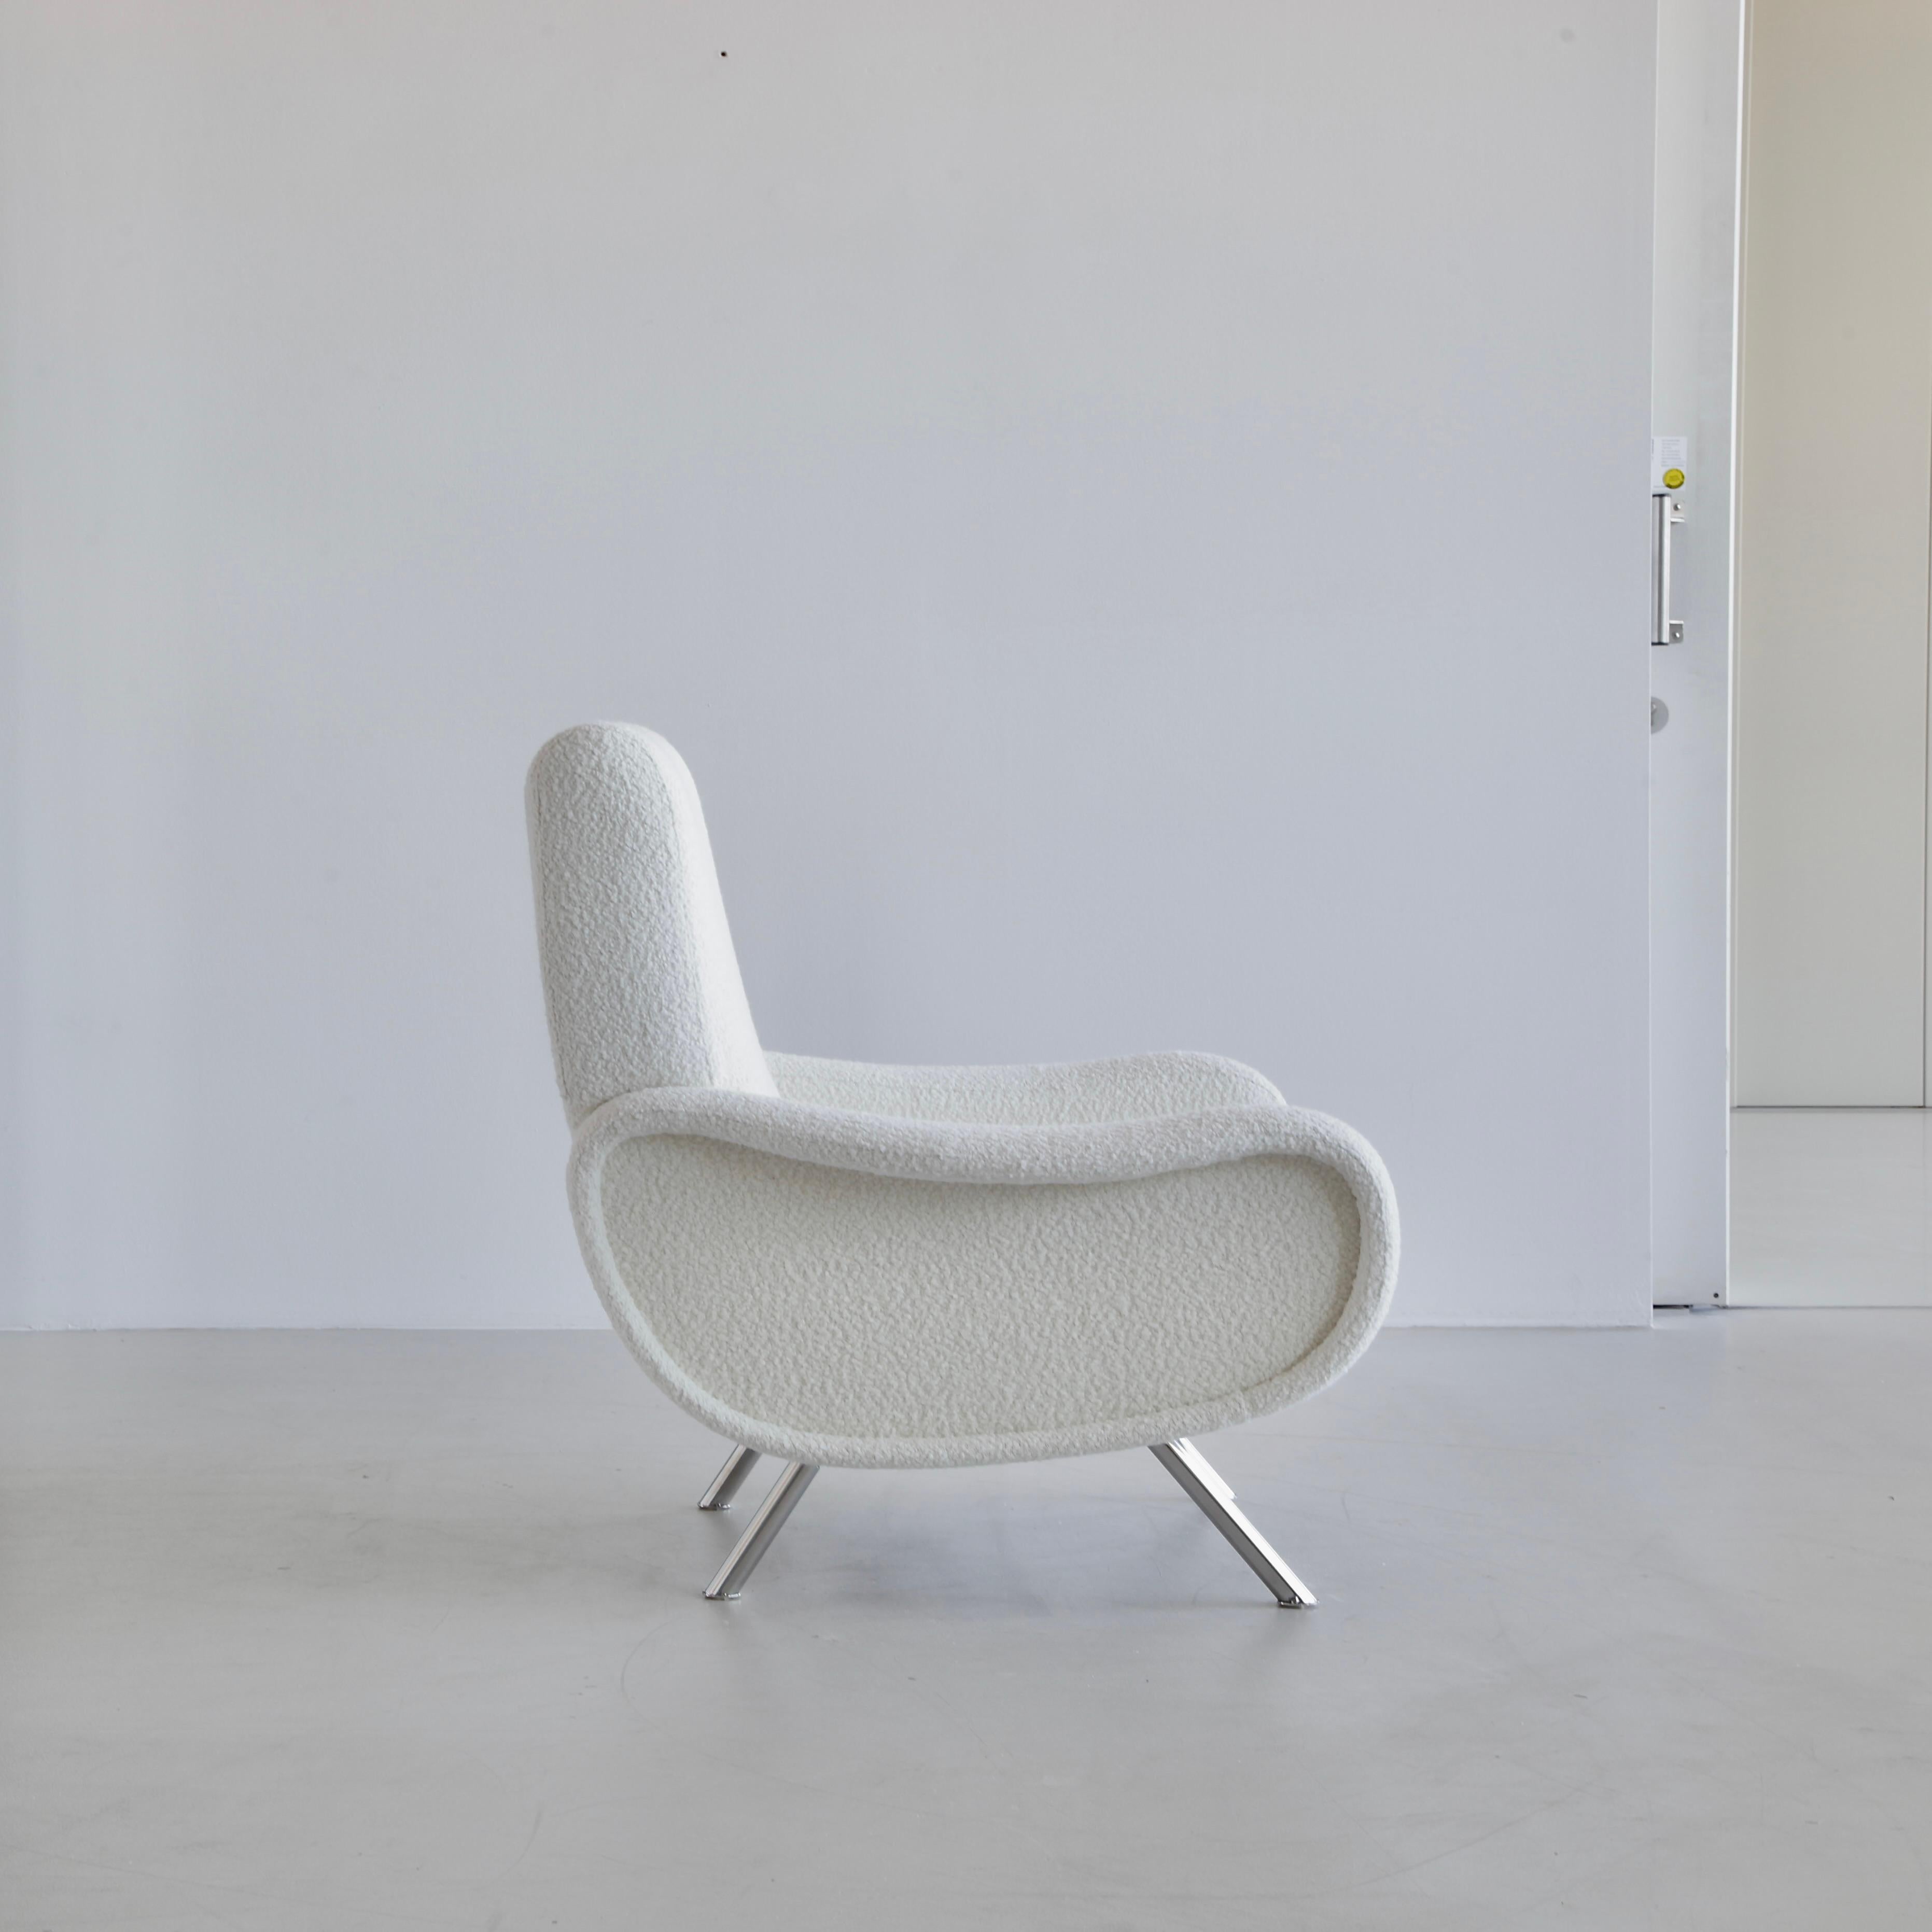 An original 'LADY' lounge chair designed by Marco Zanuso for Arflex, Milano. The chair has been upholstered in fine boucle material. Chromes legs. Seat height 36 cm.

Literature: Repertorio del Design Italiano 1950-2000, p. 25, illustrated.